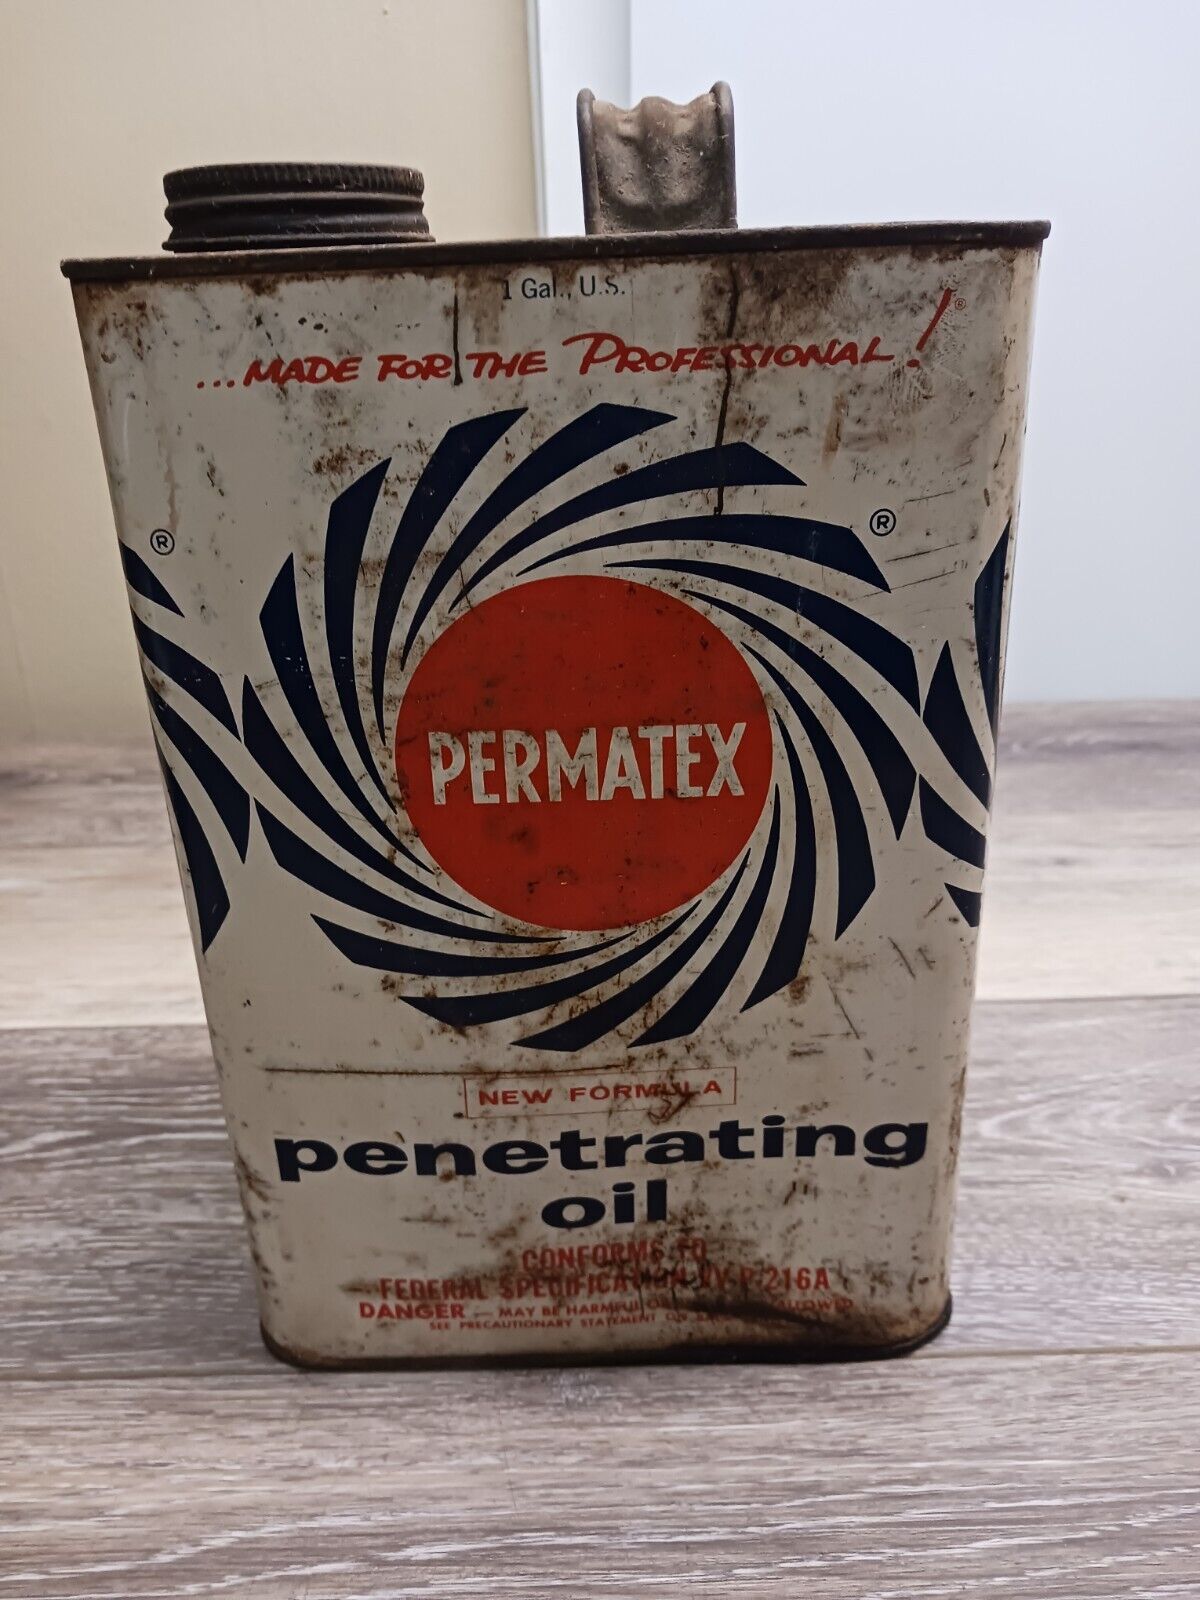 Permatex Penetrating Oil [1 US Gal.] Lubricant Empty Can 1962 Retro USA 